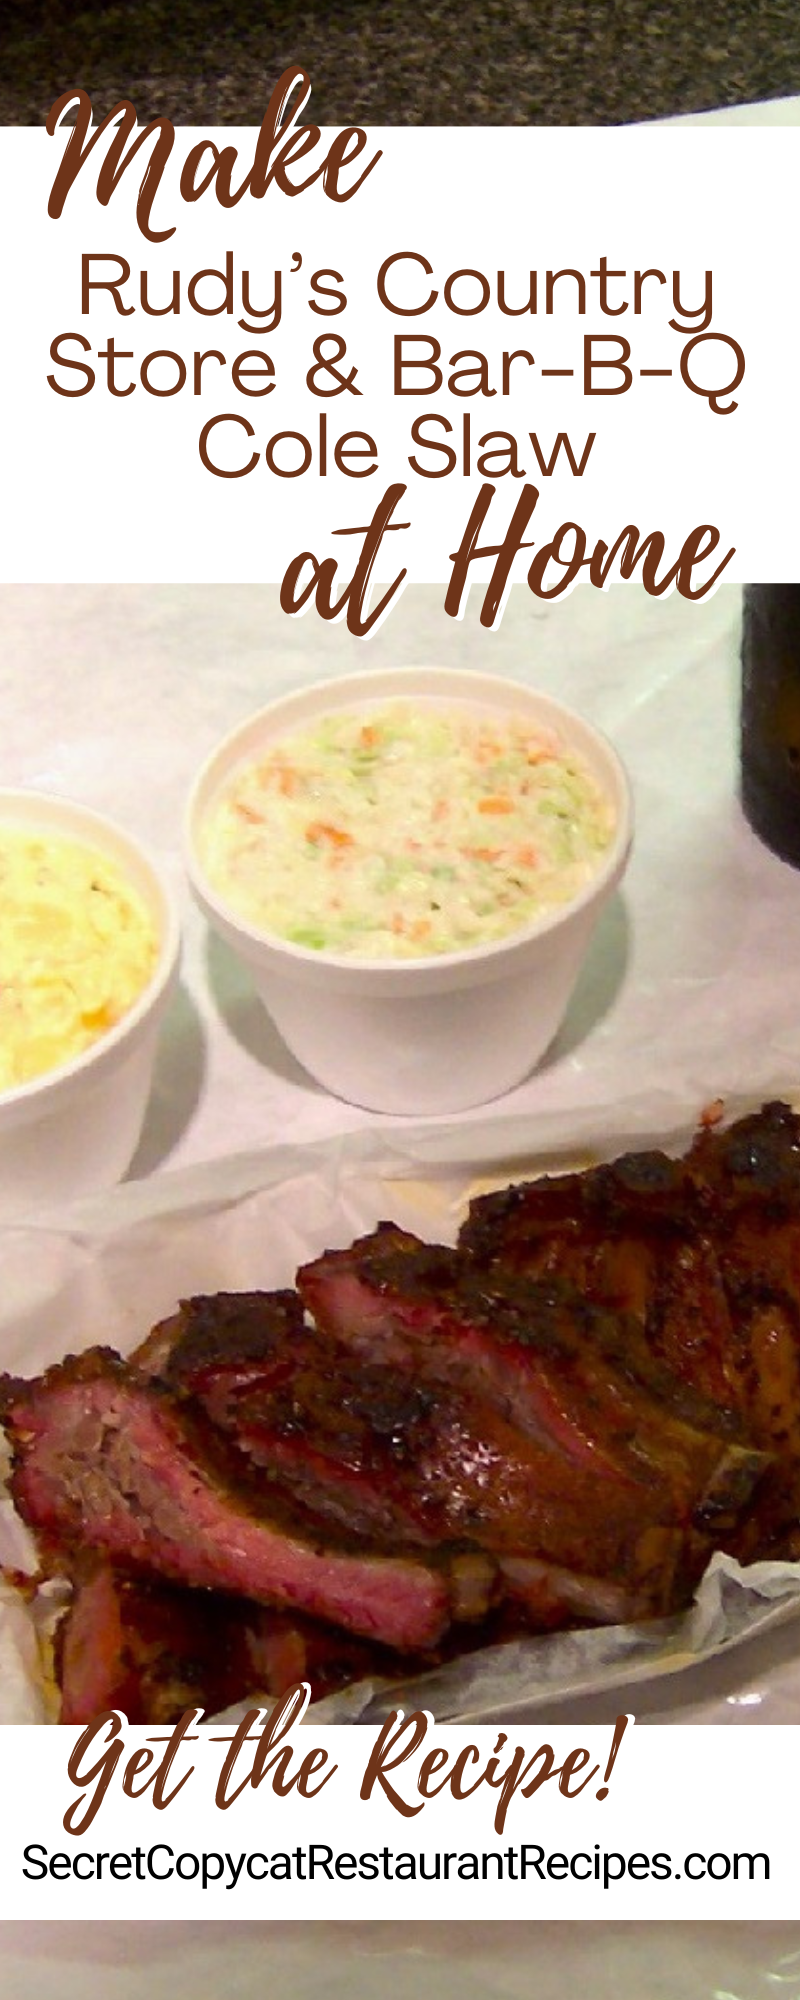 Rudy’s Country Store & Bar-B-Q Cole Slaw Recipe